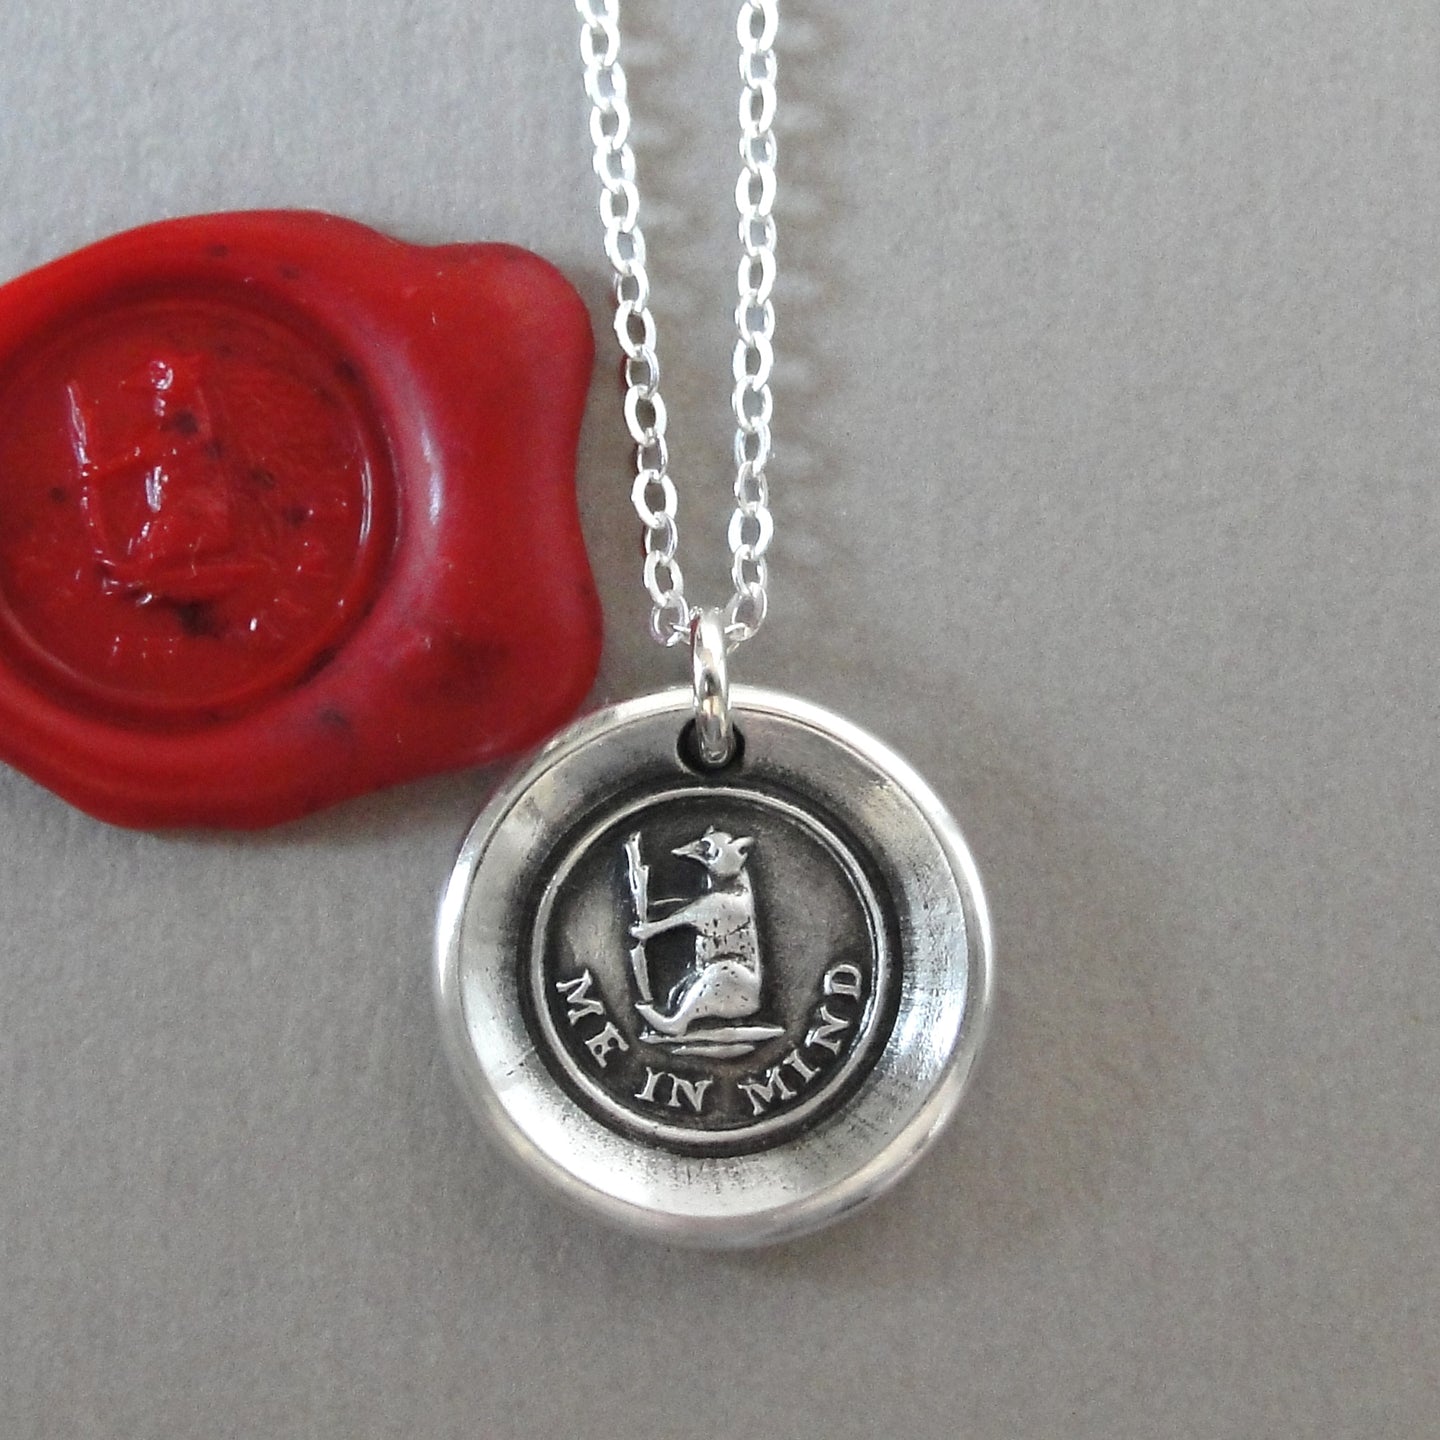 Bear Me In Mind - Wax Seal Necklace - Antique Silver Jewelry